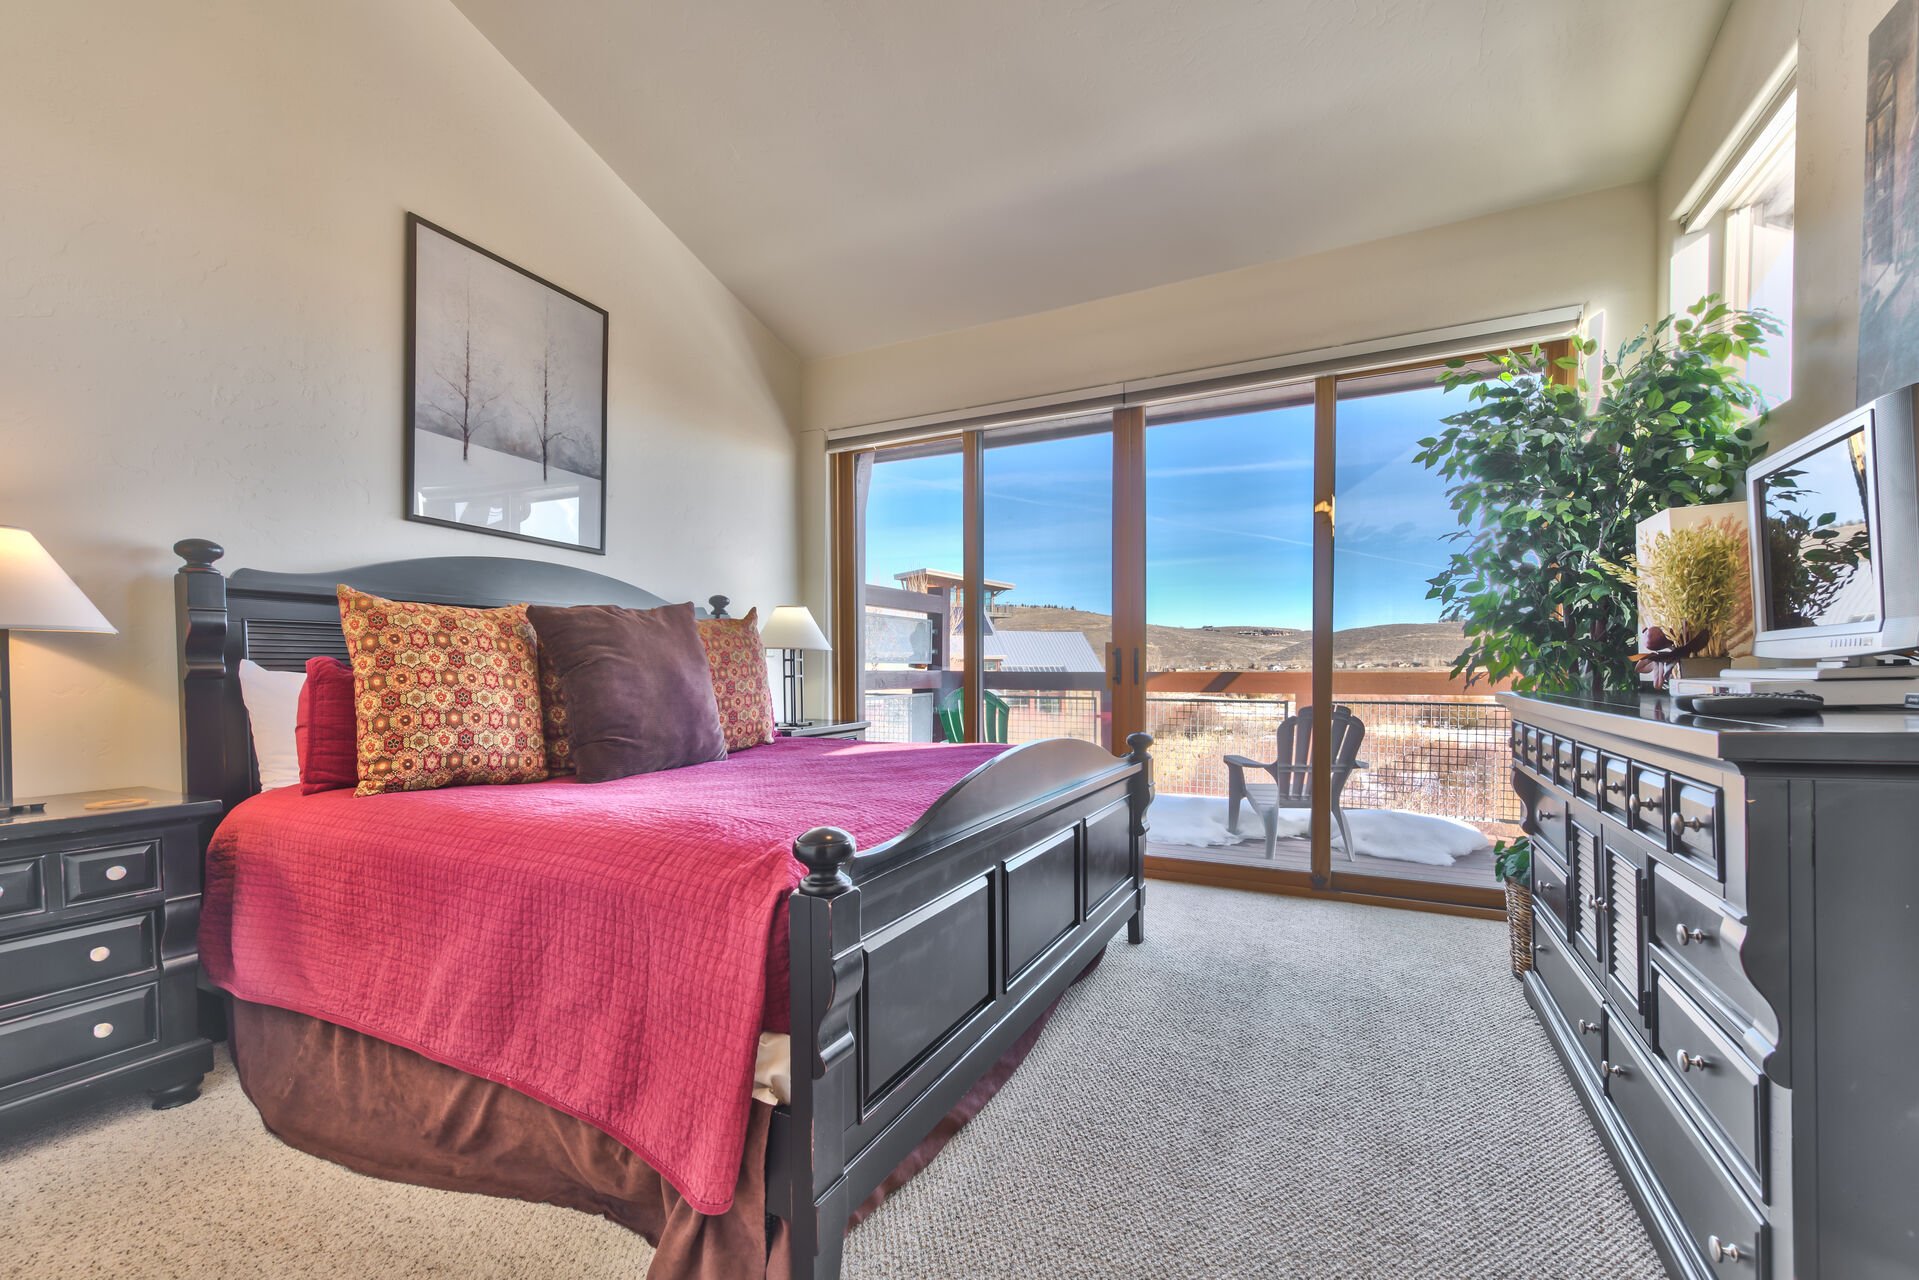 Master Bedroom with King Bed, TV/DVD, Private Bath and Deck Overlooking the Swaner Preserve